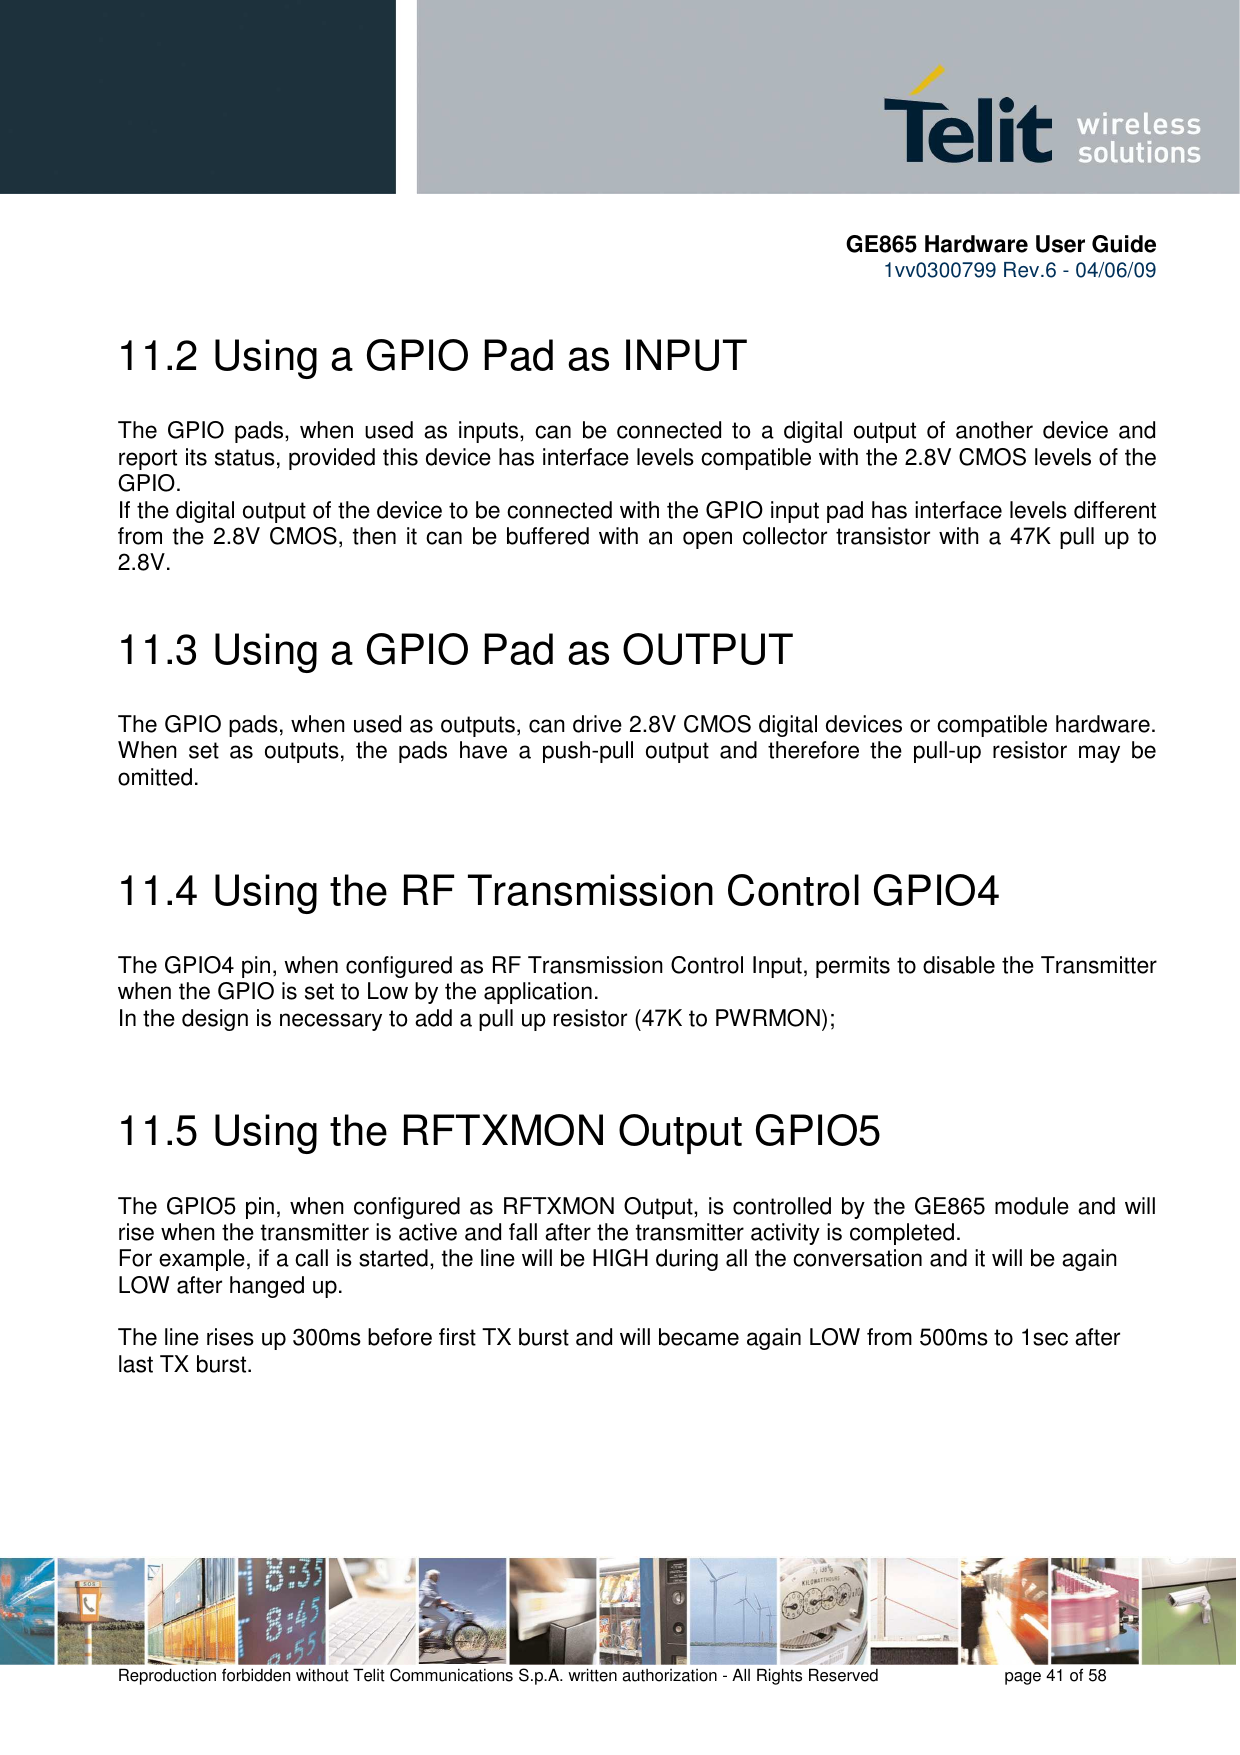       GE865 Hardware User Guide 1vv0300799 Rev.6 - 04/06/09      Reproduction forbidden without Telit Communications S.p.A. written authorization - All Rights Reserved    page 41 of 58  11.2  Using a GPIO Pad as INPUT The GPIO pads, when used as  inputs,  can  be connected to a digital output  of another device and report its status, provided this device has interface levels compatible with the 2.8V CMOS levels of the GPIO.  If the digital output of the device to be connected with the GPIO input pad has interface levels different from the 2.8V CMOS, then it can be buffered with an open collector transistor with a 47K pull up to 2.8V. 11.3  Using a GPIO Pad as OUTPUT The GPIO pads, when used as outputs, can drive 2.8V CMOS digital devices or compatible hardware. When  set  as  outputs,  the  pads  have  a  push-pull  output  and  therefore  the  pull-up  resistor  may  be omitted.  11.4  Using the RF Transmission Control GPIO4 The GPIO4 pin, when configured as RF Transmission Control Input, permits to disable the Transmitter when the GPIO is set to Low by the application. In the design is necessary to add a pull up resistor (47K to PWRMON);   11.5  Using the RFTXMON Output GPIO5 The GPIO5 pin, when configured as RFTXMON Output, is controlled by the GE865 module and will rise when the transmitter is active and fall after the transmitter activity is completed. For example, if a call is started, the line will be HIGH during all the conversation and it will be again LOW after hanged up.  The line rises up 300ms before first TX burst and will became again LOW from 500ms to 1sec after last TX burst.  